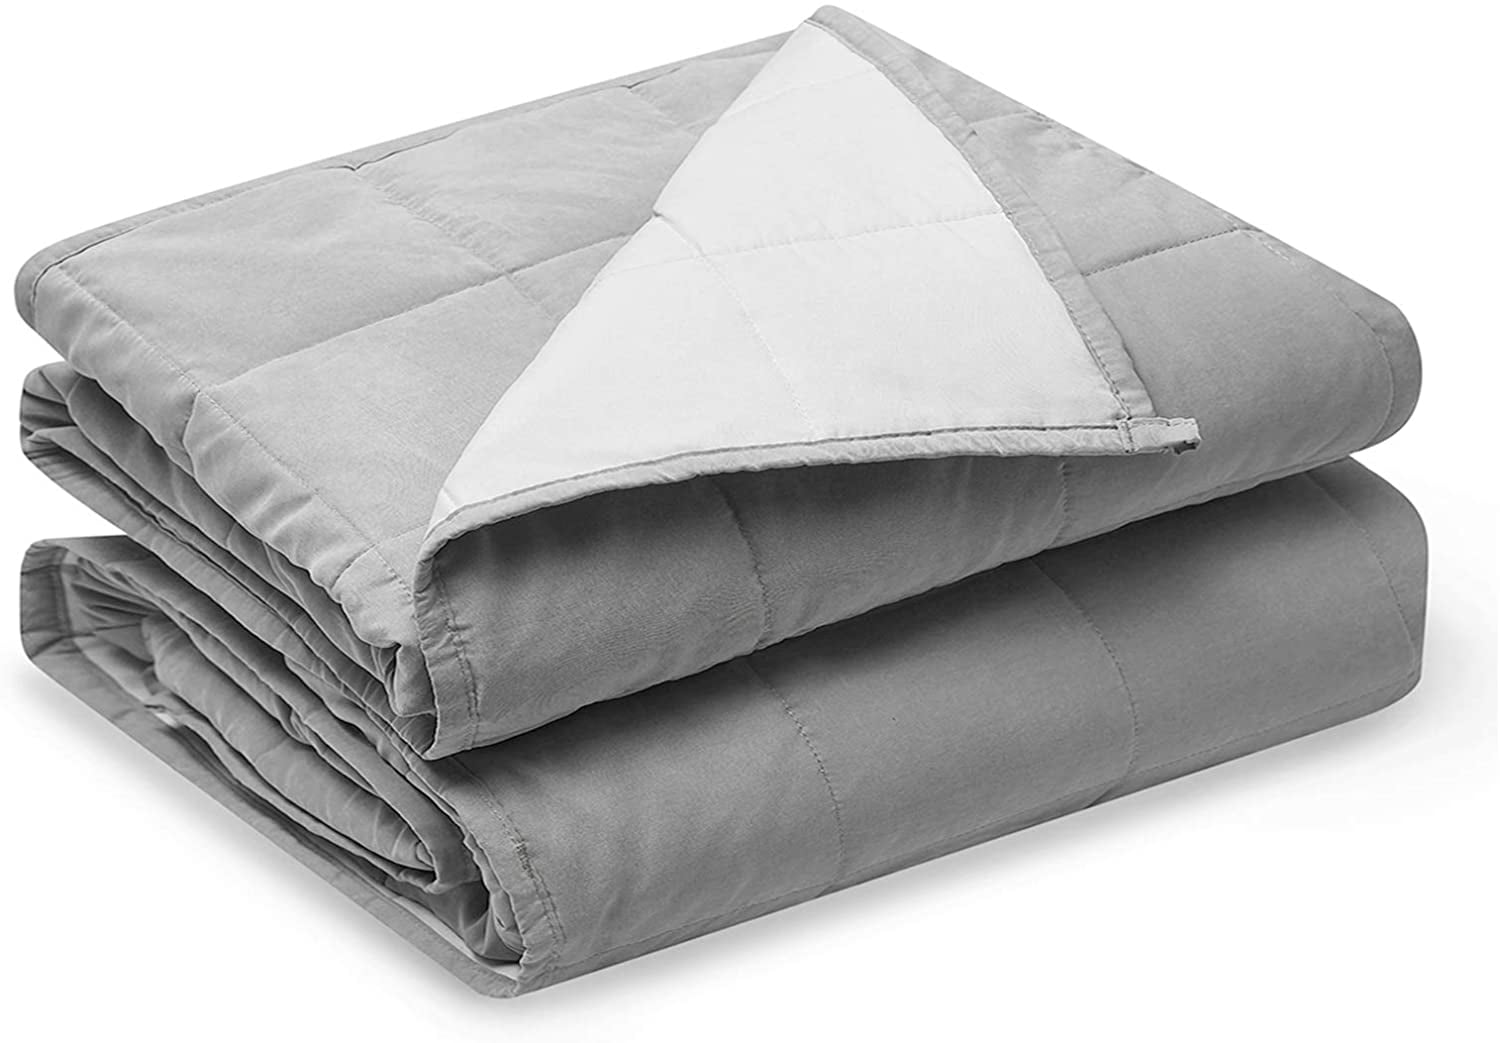 Ynm Weighted Blanket Cotton Polyester, How To Put Duvet Cover On Ynm Weighted Blanket